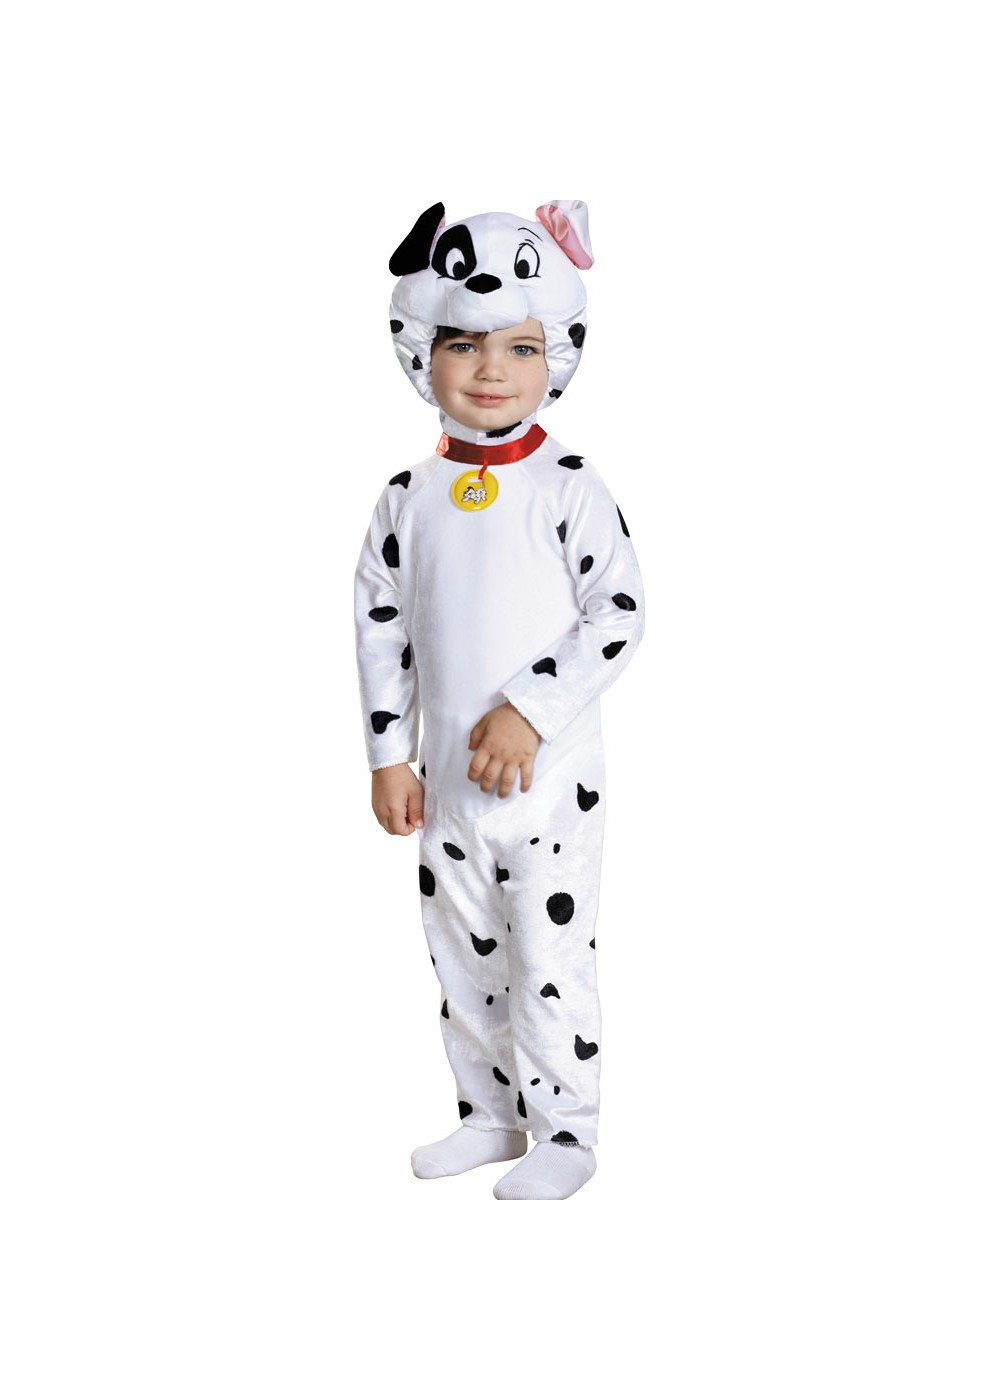 Toddler Dalmations Costume